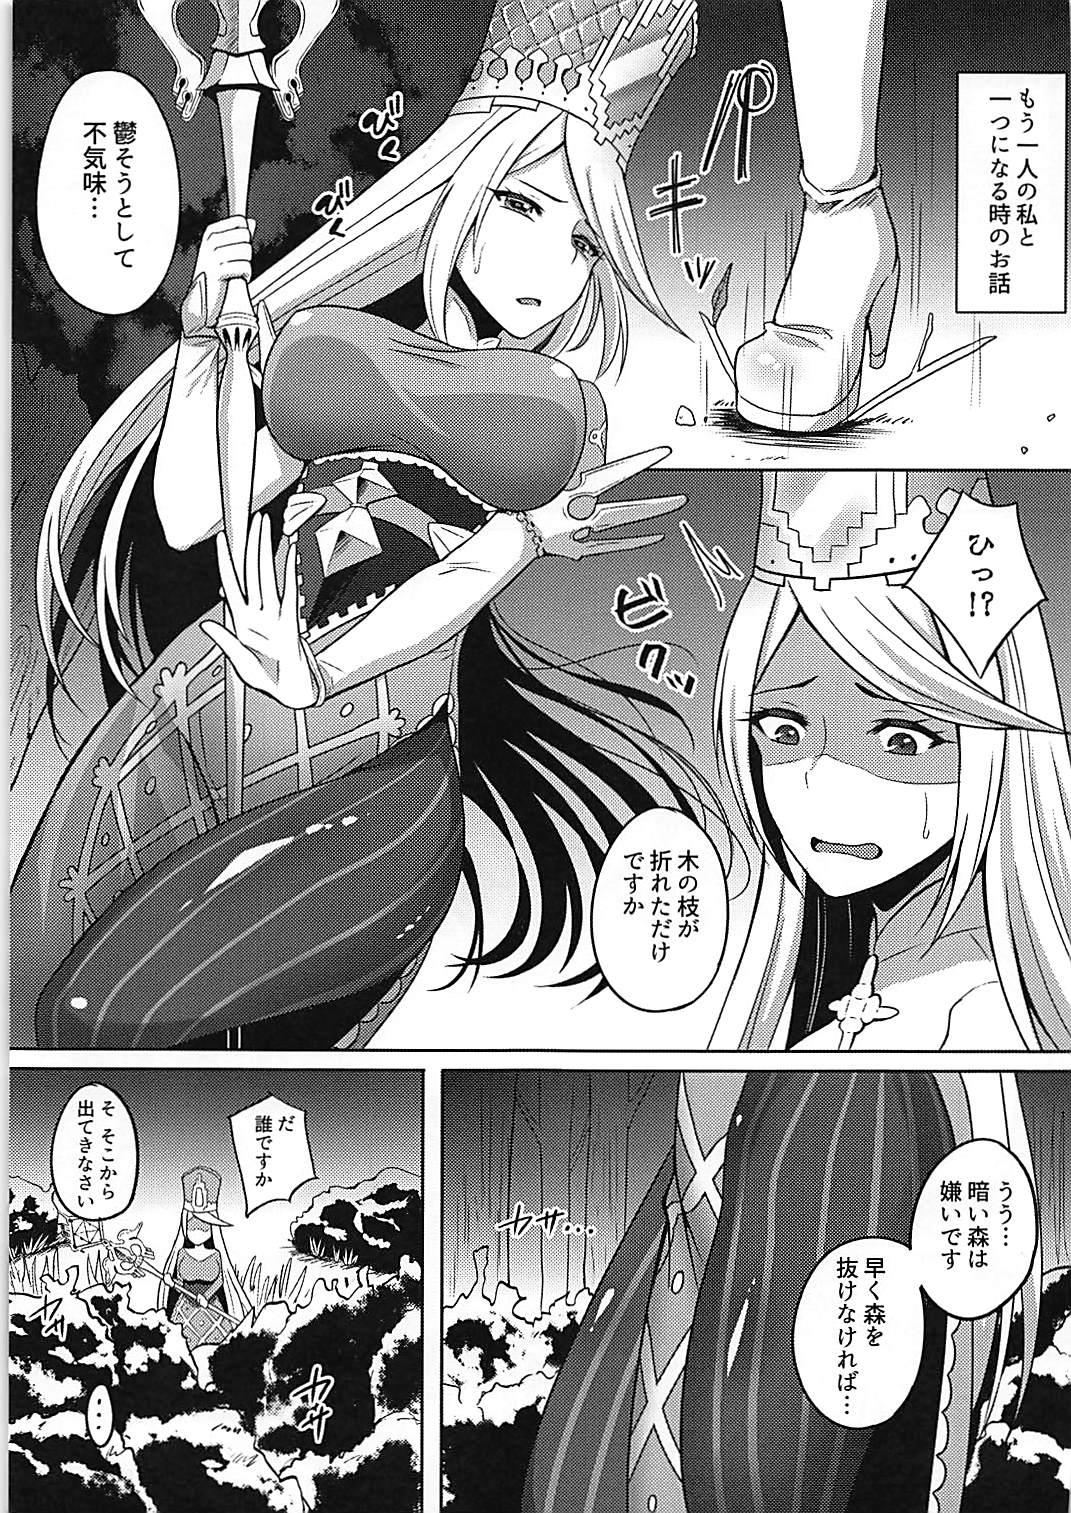 Relax 救いの光 - Shadowverse Sexy Girl - Page 3